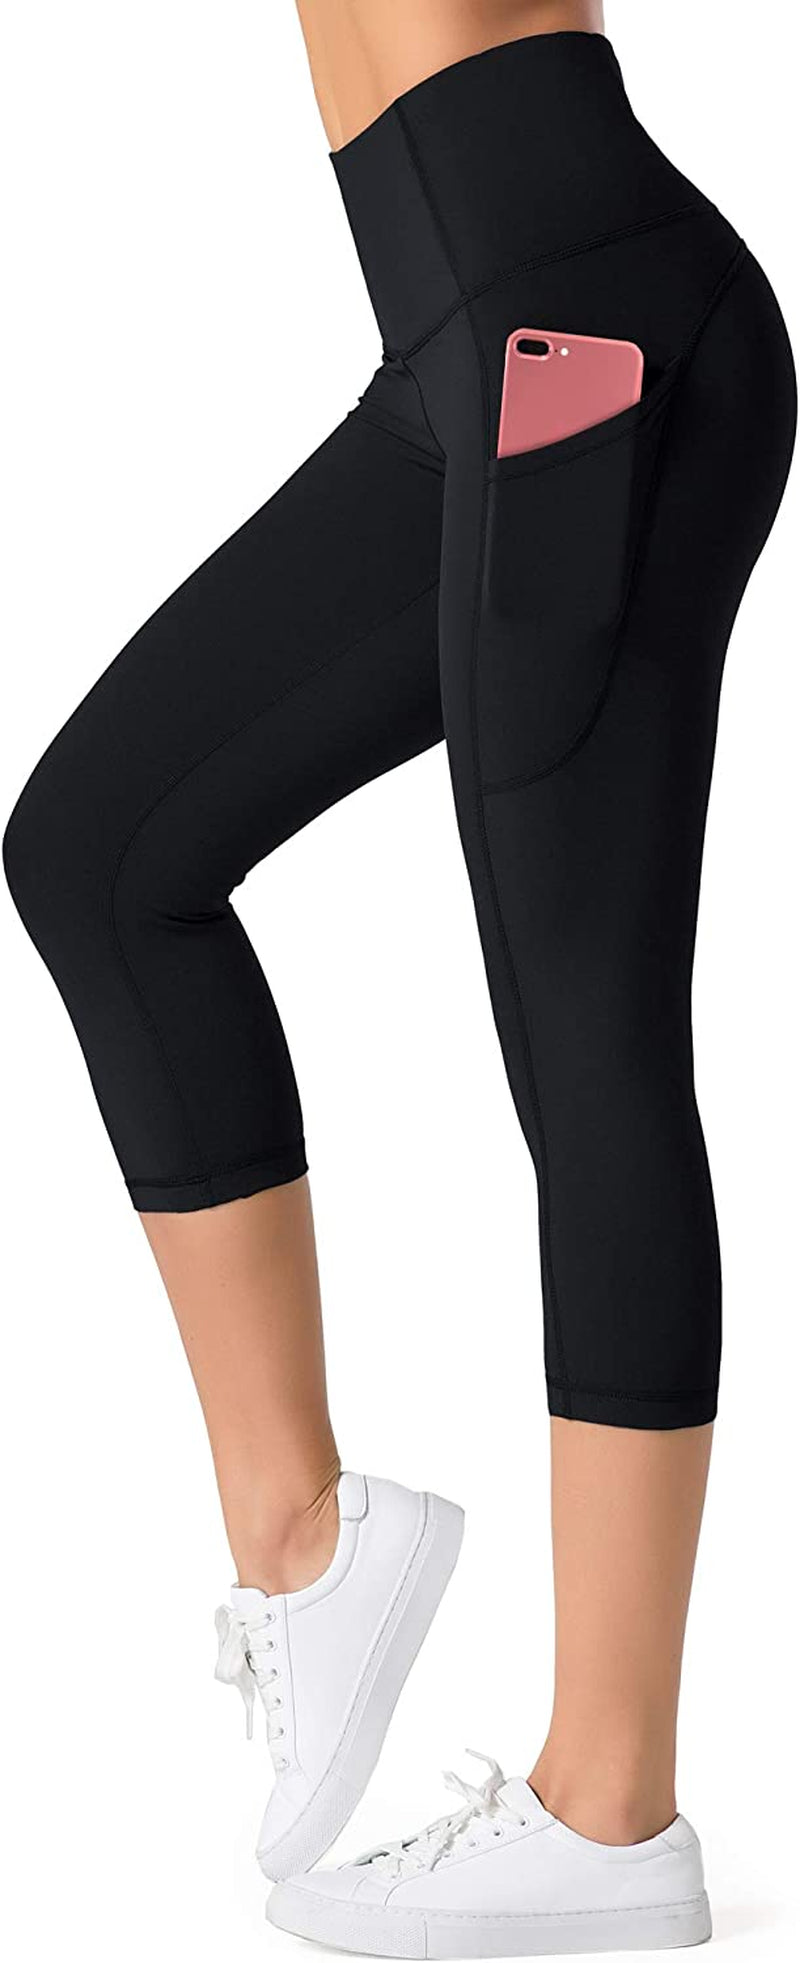  Dragon Fit Compression Yoga Pants with Inner Pockets